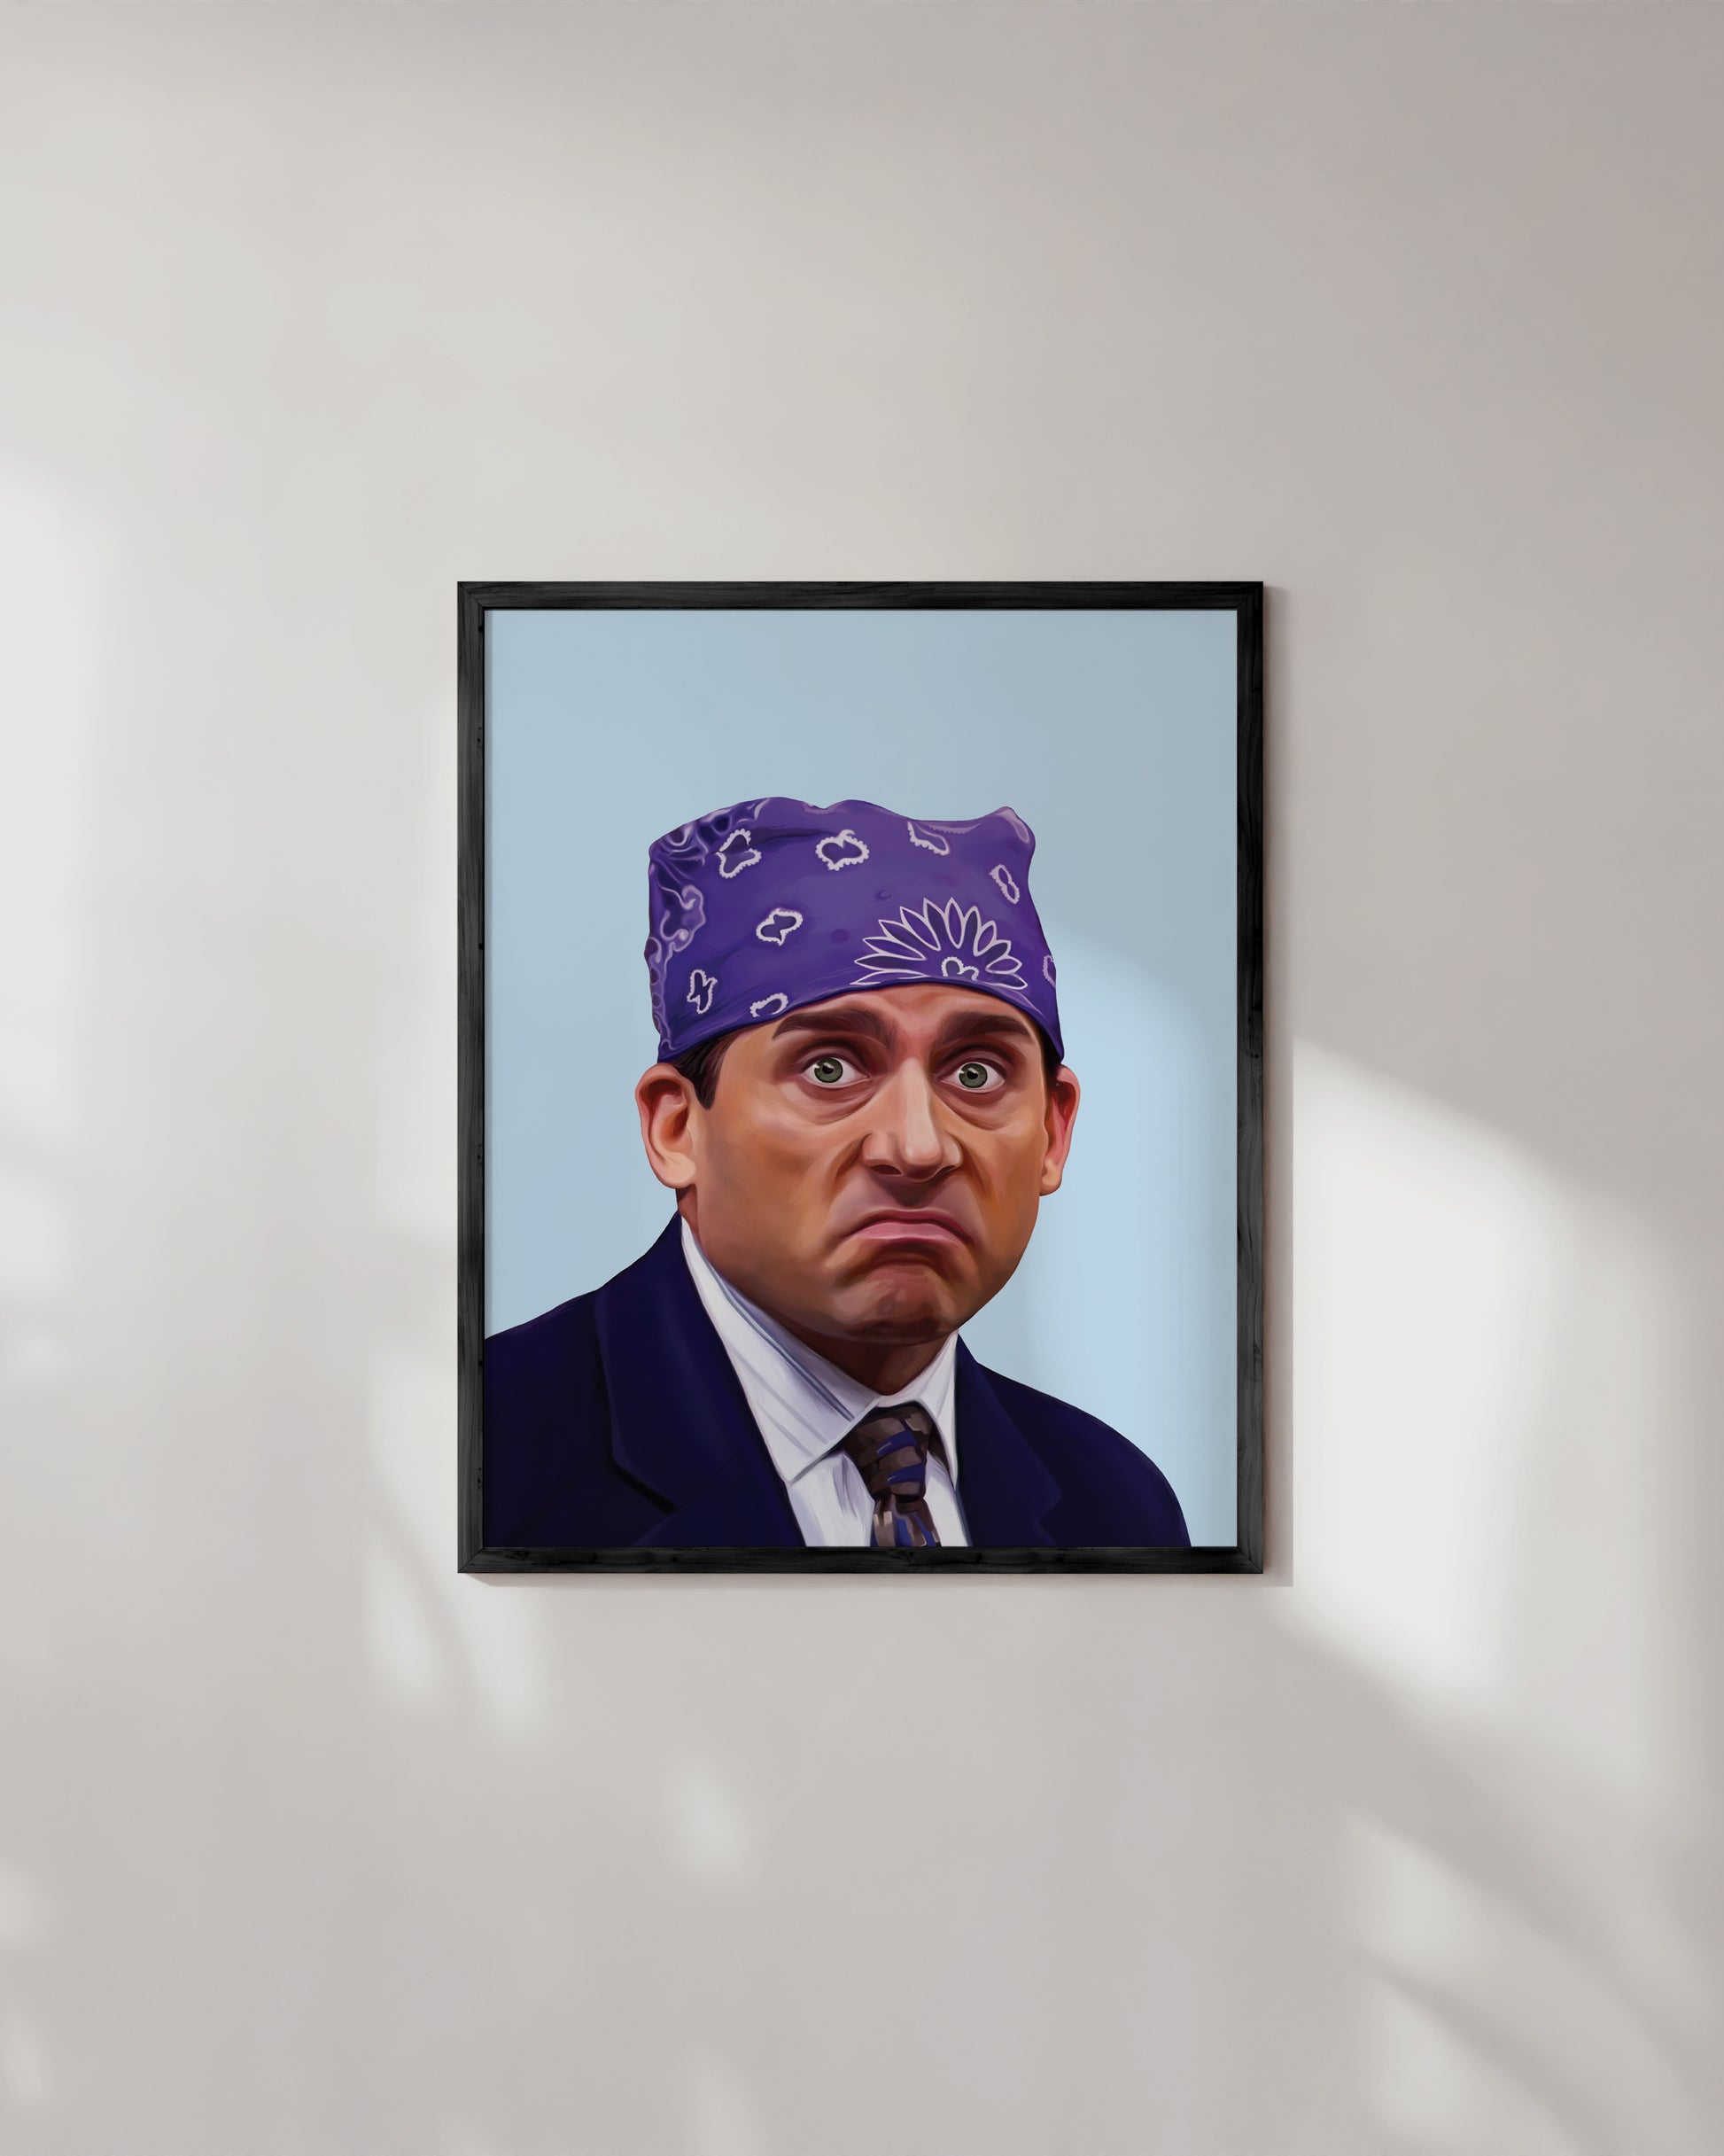 The Office Michael Scott + Dwight Schrute Motivational Quote Frame Wall Art  Decor 8x10 The Office Gift - You Miss 100% Of The Shots You Dont Take 